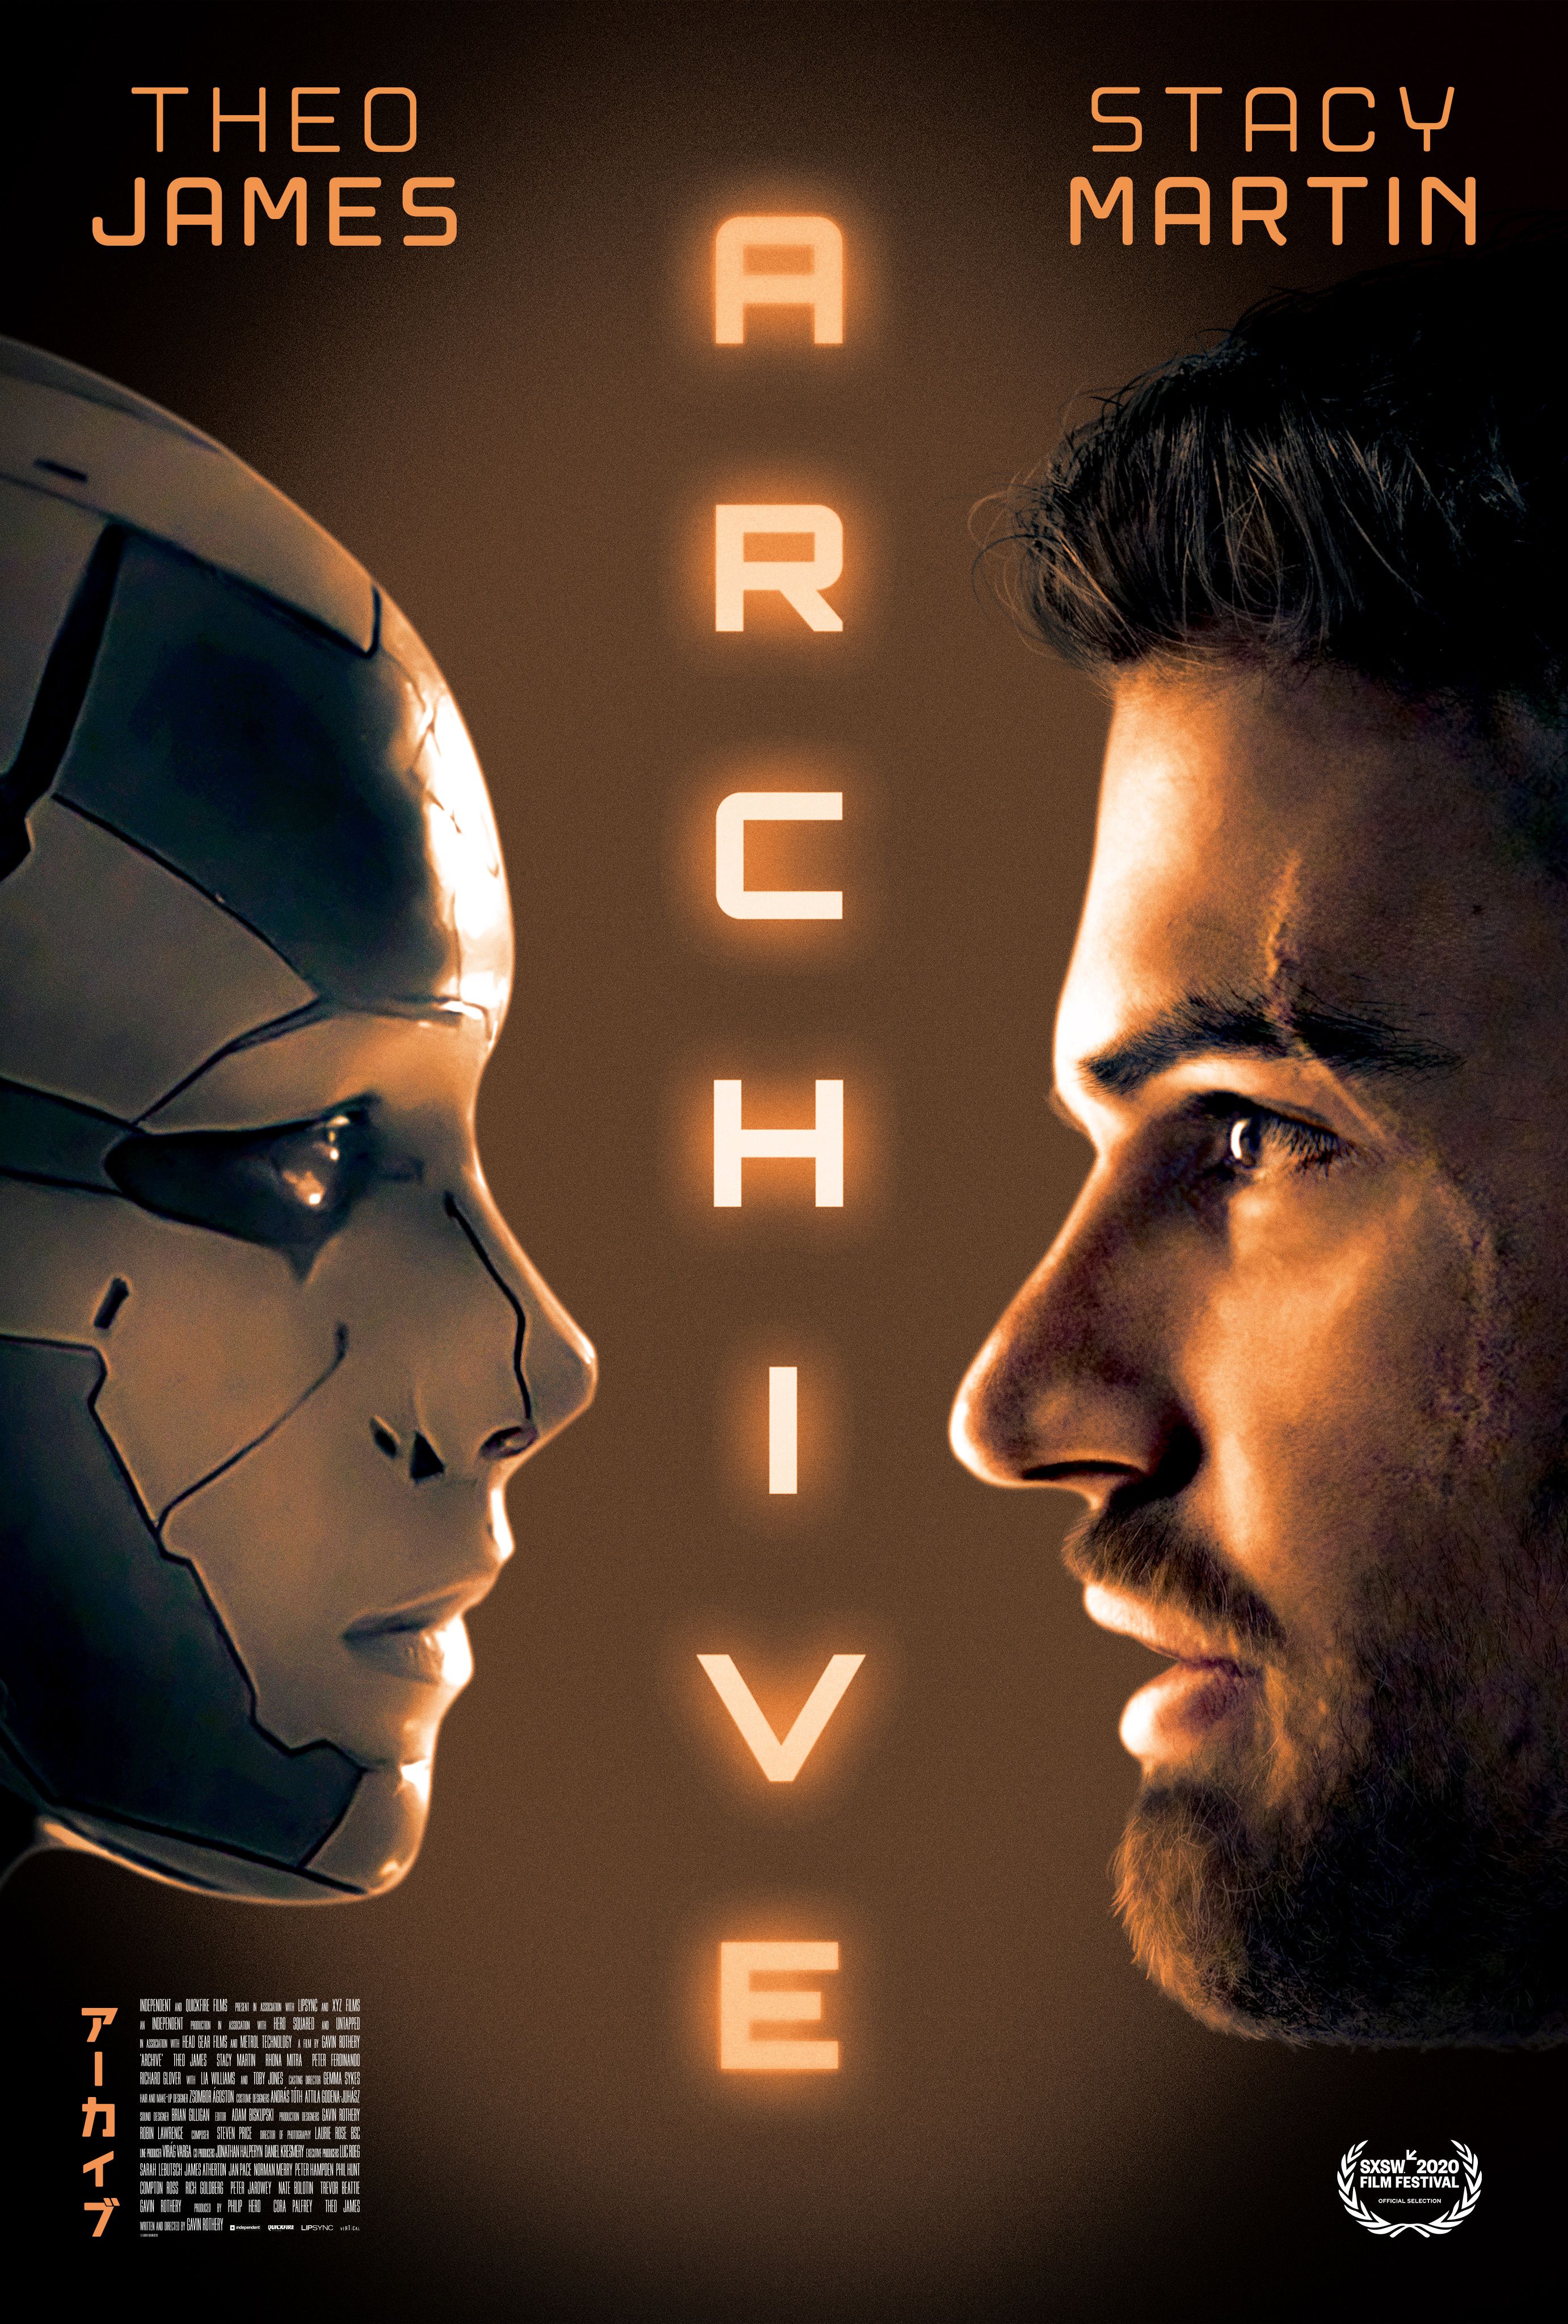 Archive (2020) Hindi Dubbed BluRay download full movie